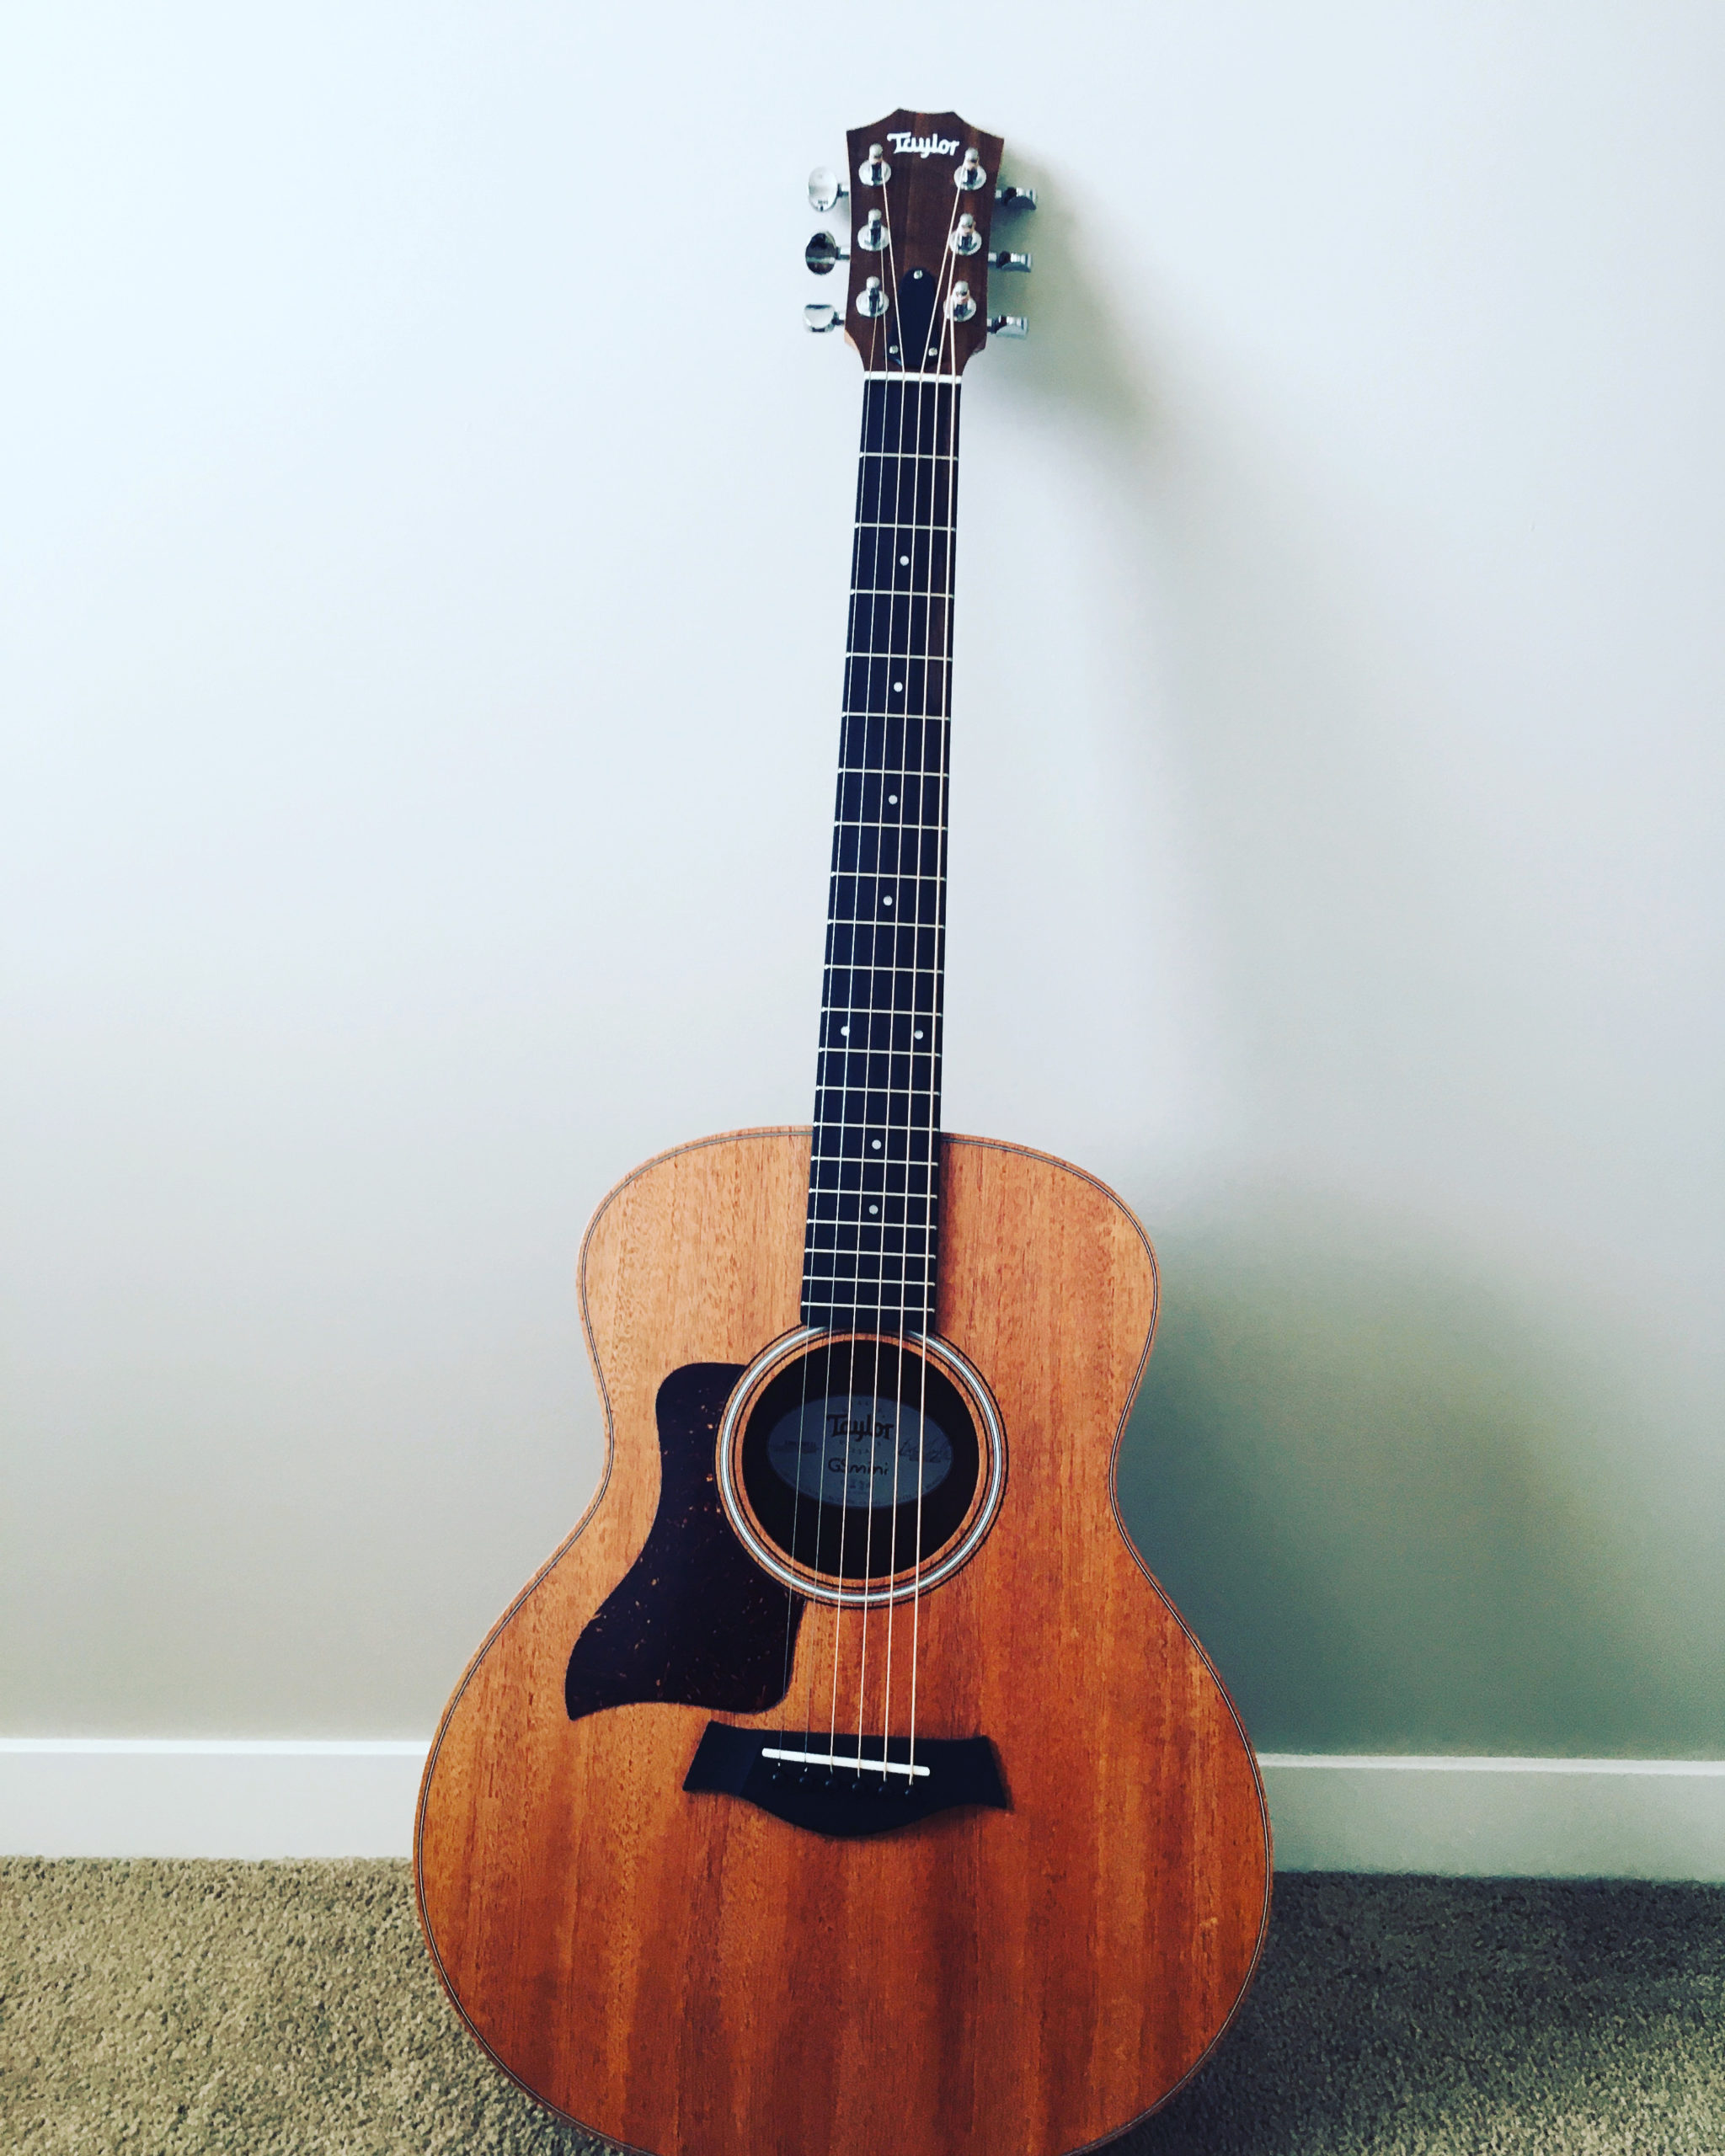 Sarah's been increasing her knowledge of all her creative pursuits. In the photo is Sarah's new guitar. A beautiful mahogany topped Taylor GS Mini. 